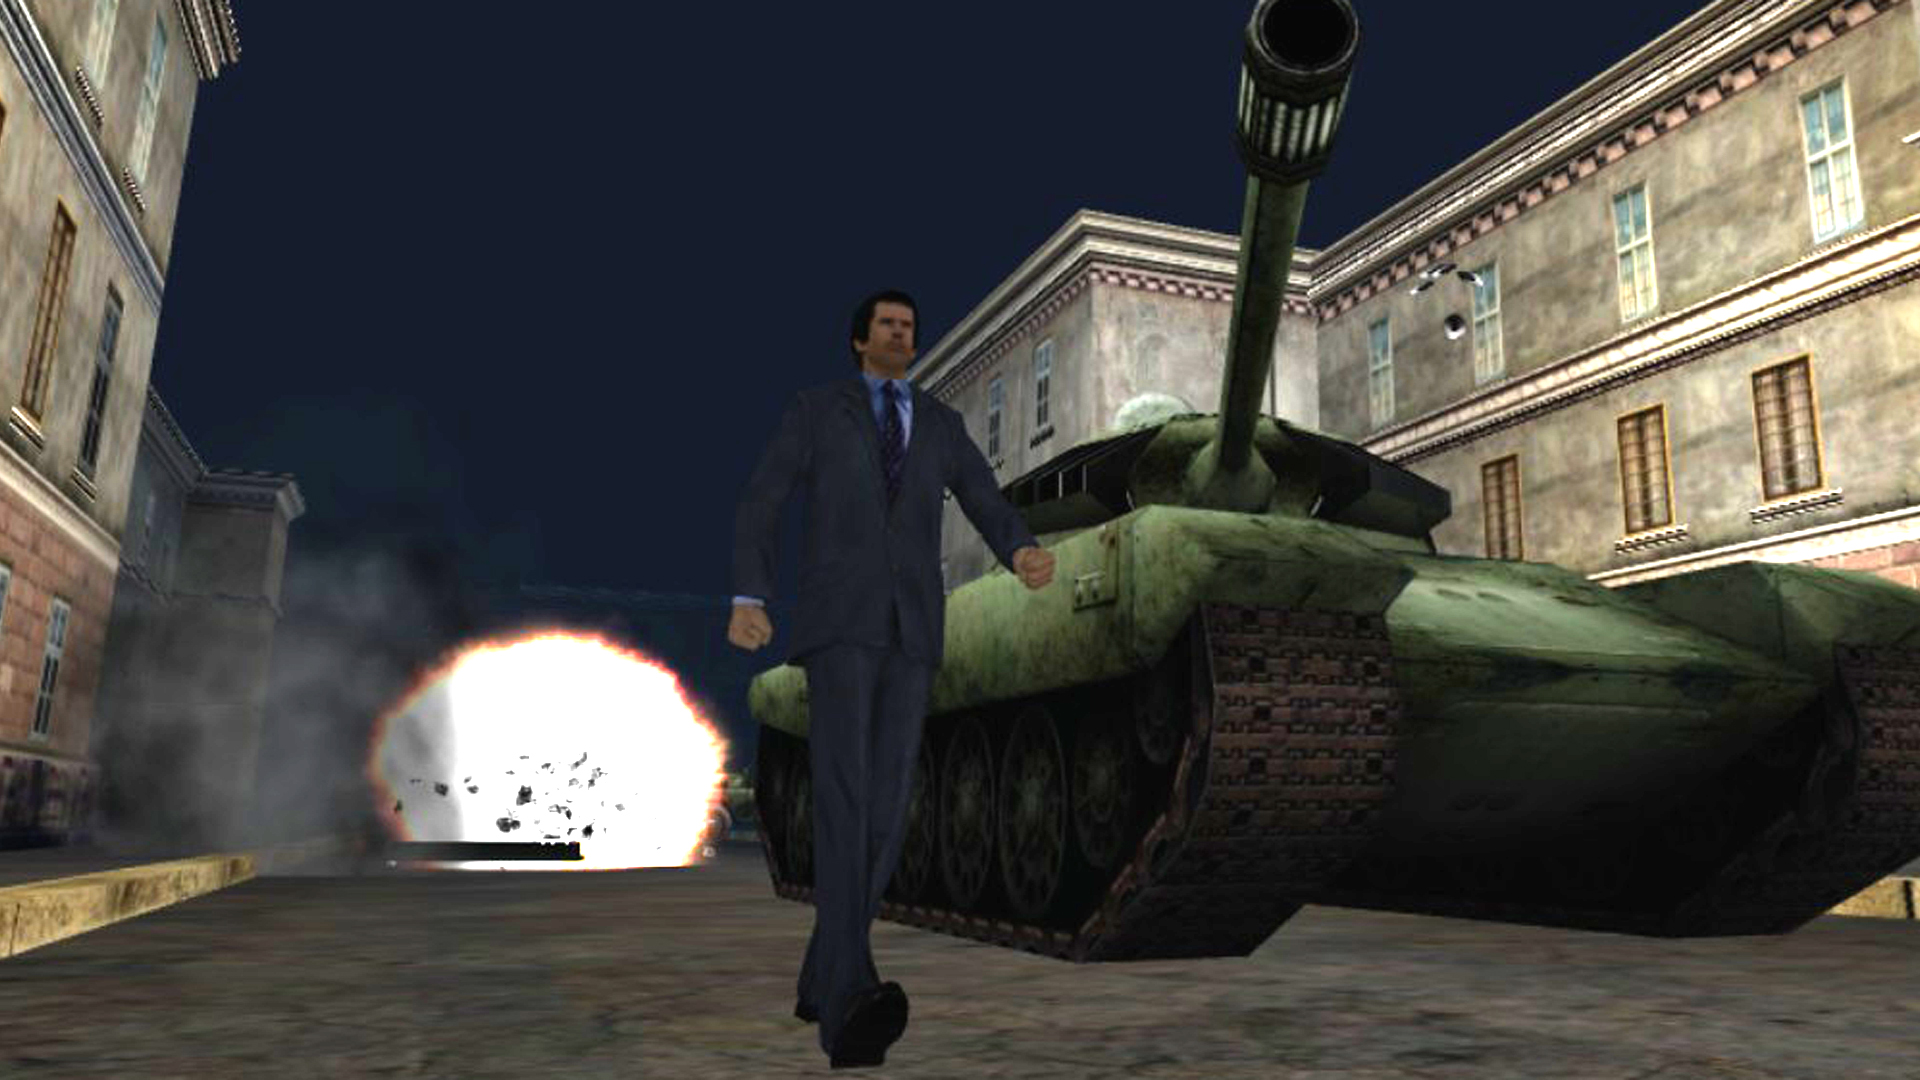 GoldenEye 007' Remaster Could Be Coming Very Soon